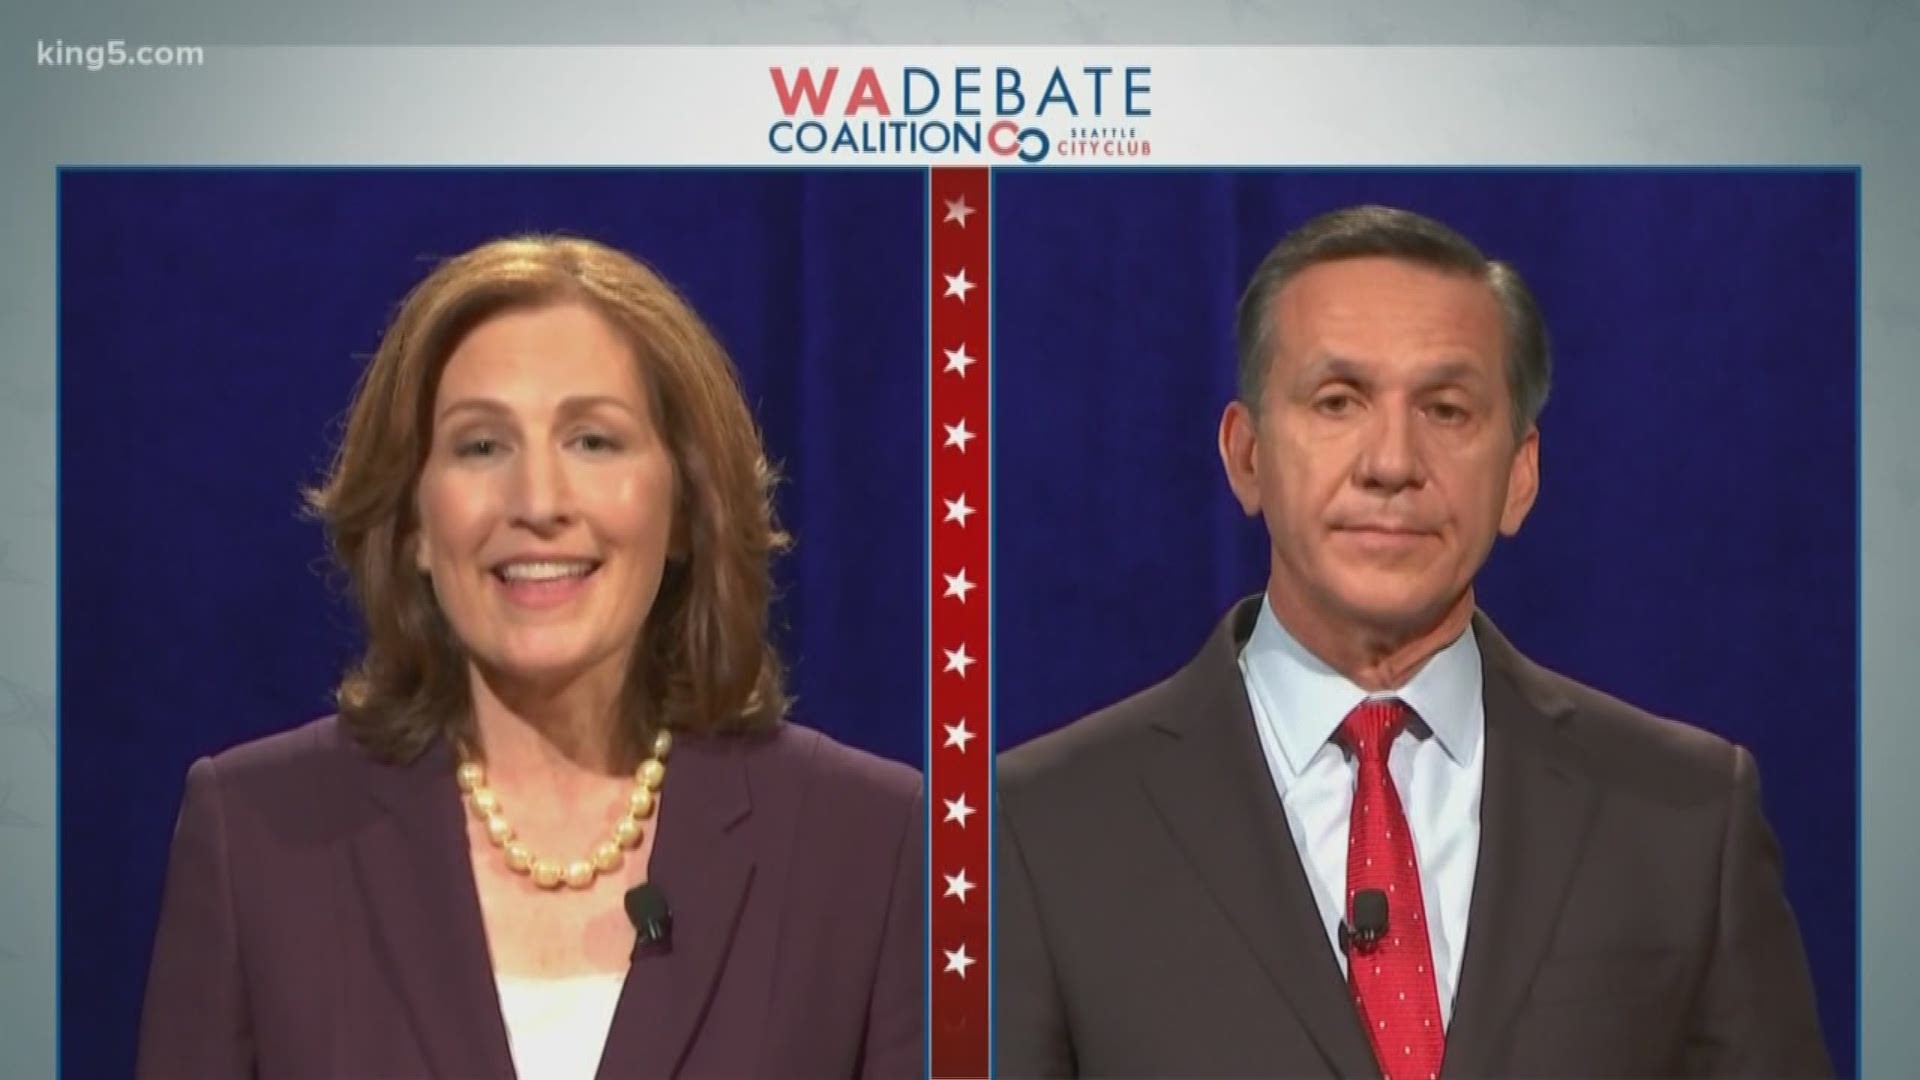 Former state Sen. Dino Rossi, a Republican, and pediatrician Kim Schrier, a Democrat, faced off in a debate Wednesday night in Ellensburg as they battle for an open seat in the 8th Congressional District.